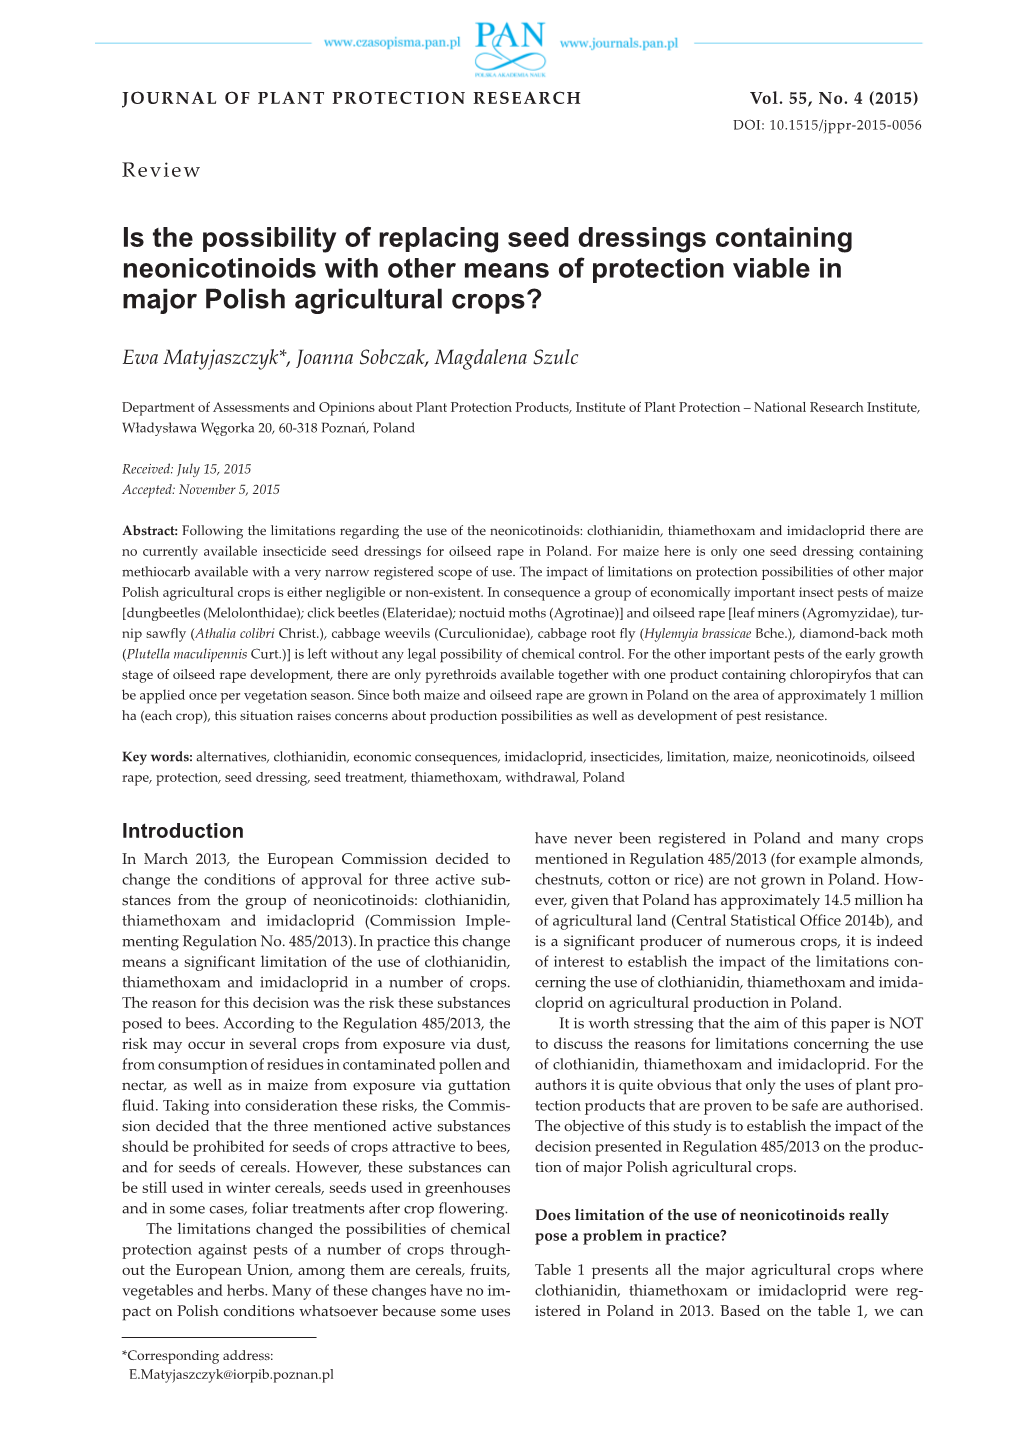 Is the Possibility of Replacing Seed Dressings Containing Neonicotinoids with Other Means of Protection Viable in Major Polish Agricultural Crops?